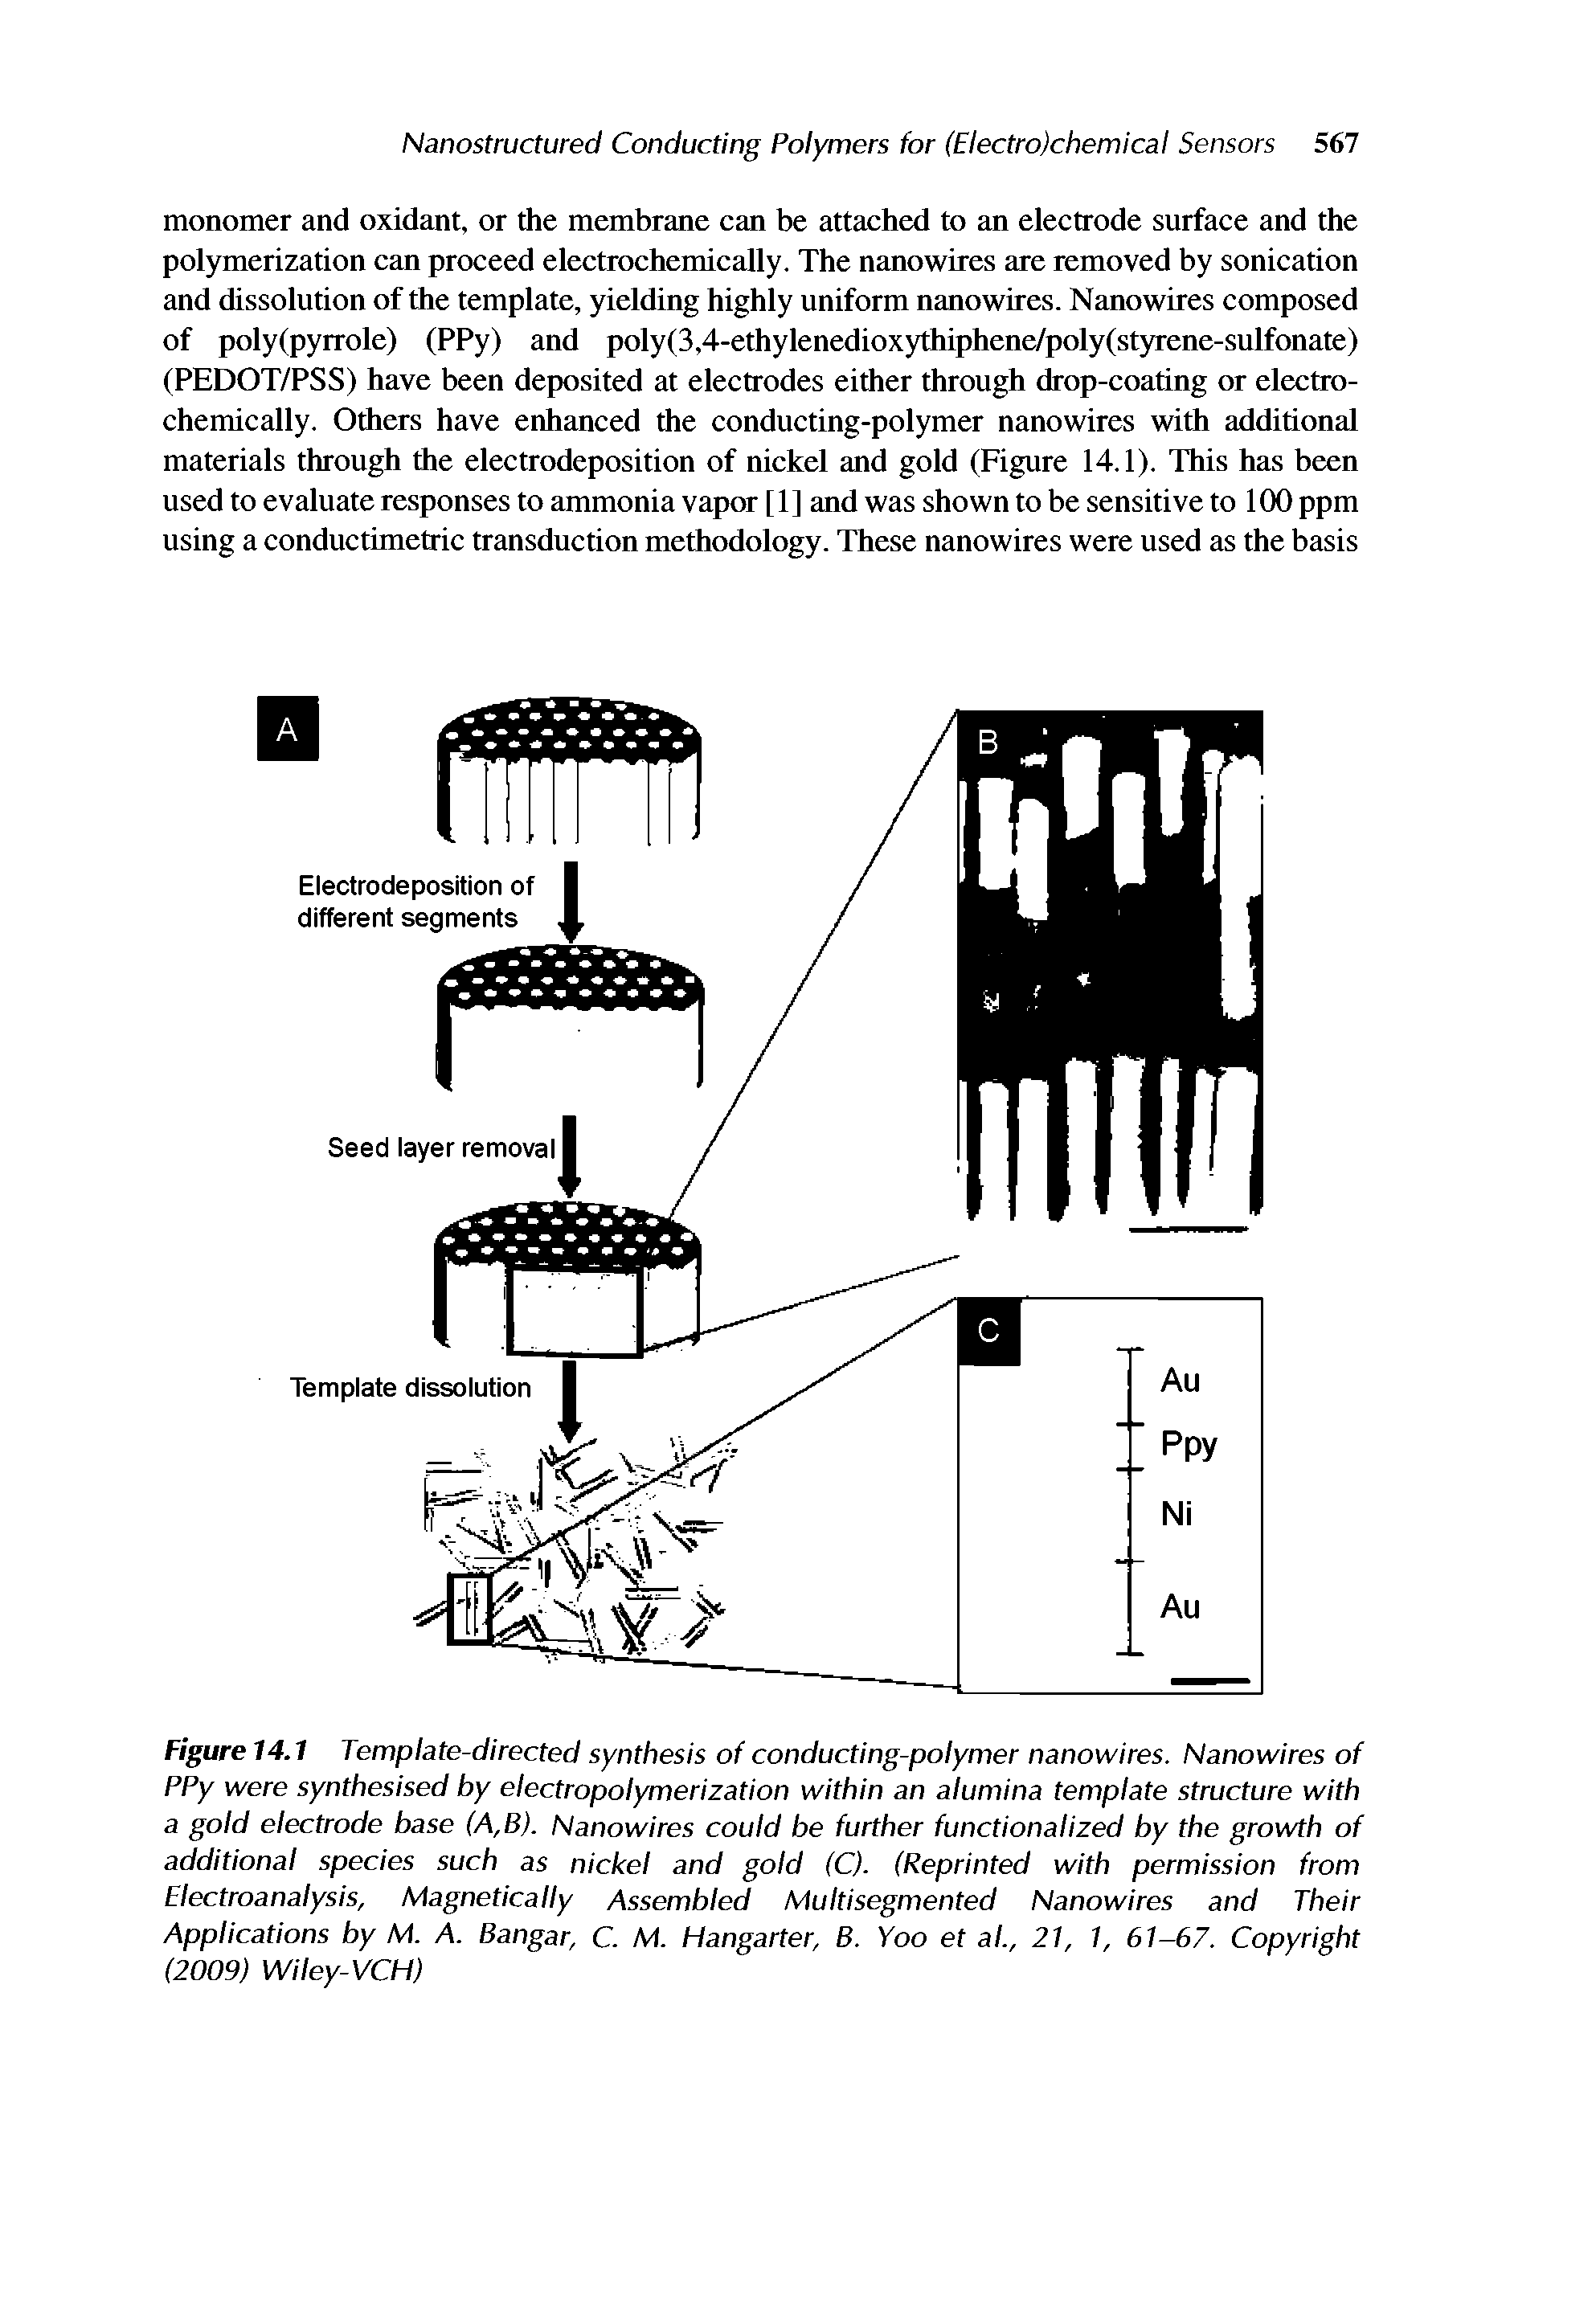 Figure 14.1 Template-directed synthesis of conducting-polymer nanowires. Nanowires of PPy were synthesised by electropolymerization within an alumina template structure with a gold electrode base (A,B). Nanowires could be further functionalized by the growth of additional species such as nickel and gold (C). (Reprinted with permission from Electroanalysis, Magnetically Assembled Multisegmented Nanowires and Their Applications by M. A. Bangar, C. M. Hangarter, B. Yoo et al., 21, 1, 61-67. Copyright (2009) Wiley-VCH)...